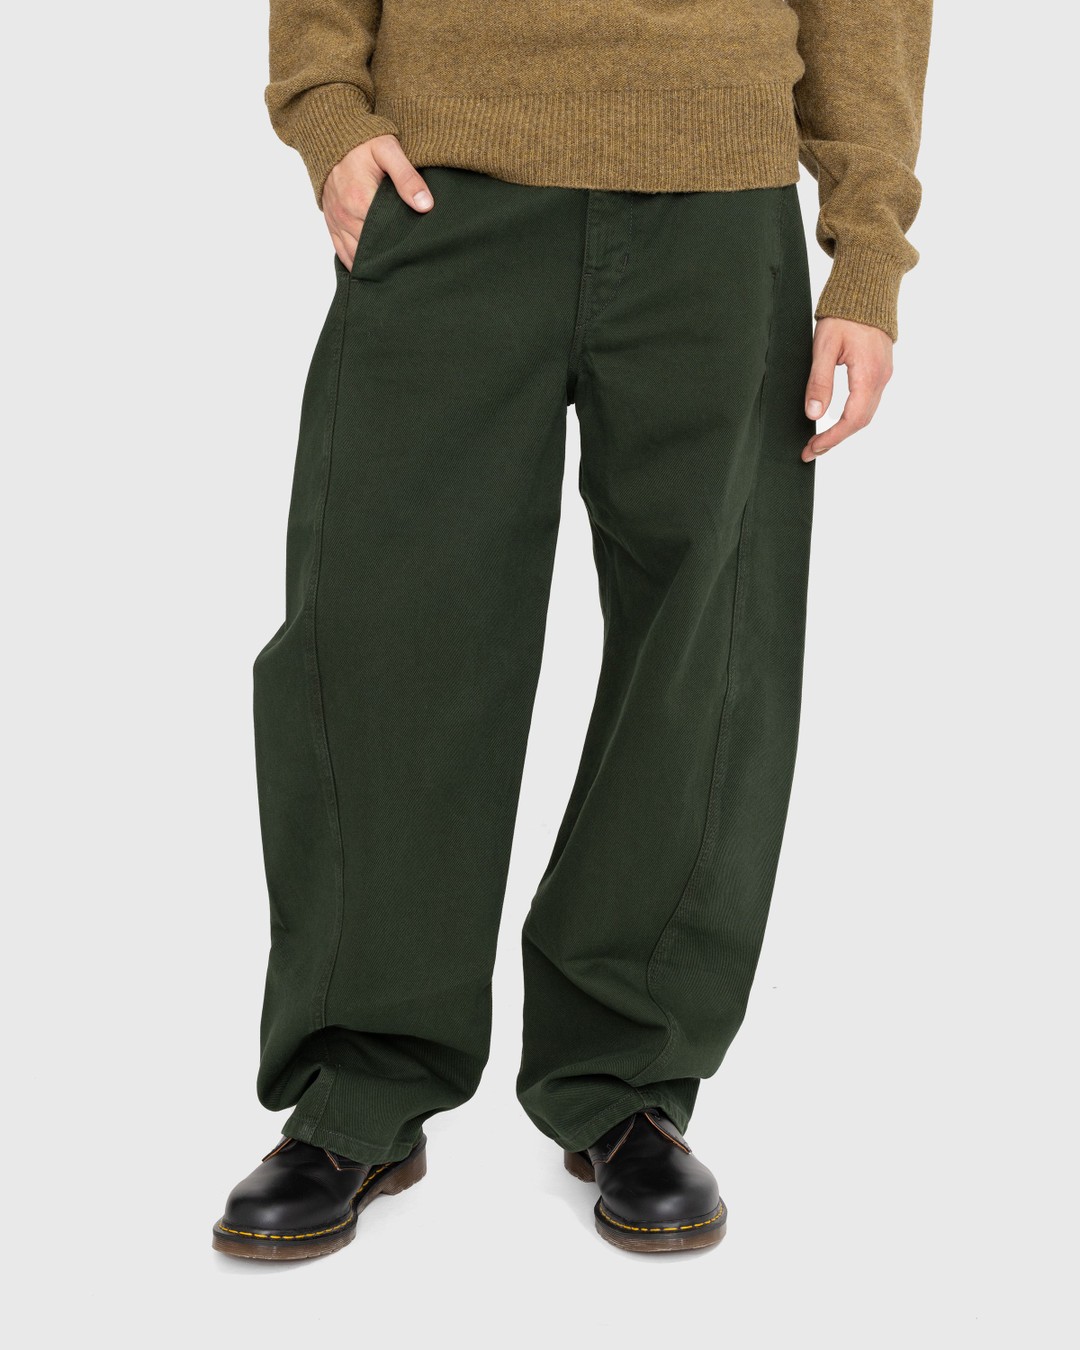 Lemaire – Twisted Belted Pants Green - Pants - Green - Image 2